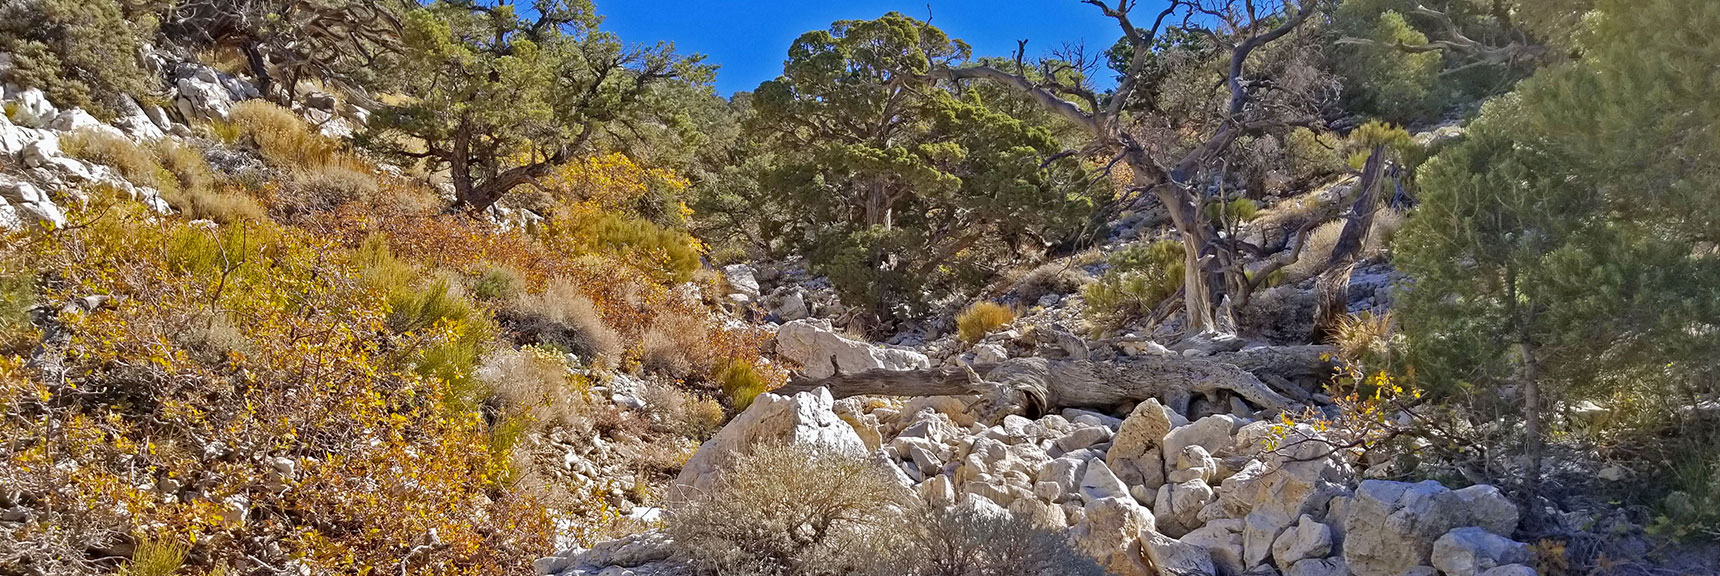 Looking Ahead Up Wash, More Boulders, Rate of Ascent Increasing | La Madre Mountain,, El Padre Mountain, Burnt Peak | La Madre Mountains Wilderness, Nevada